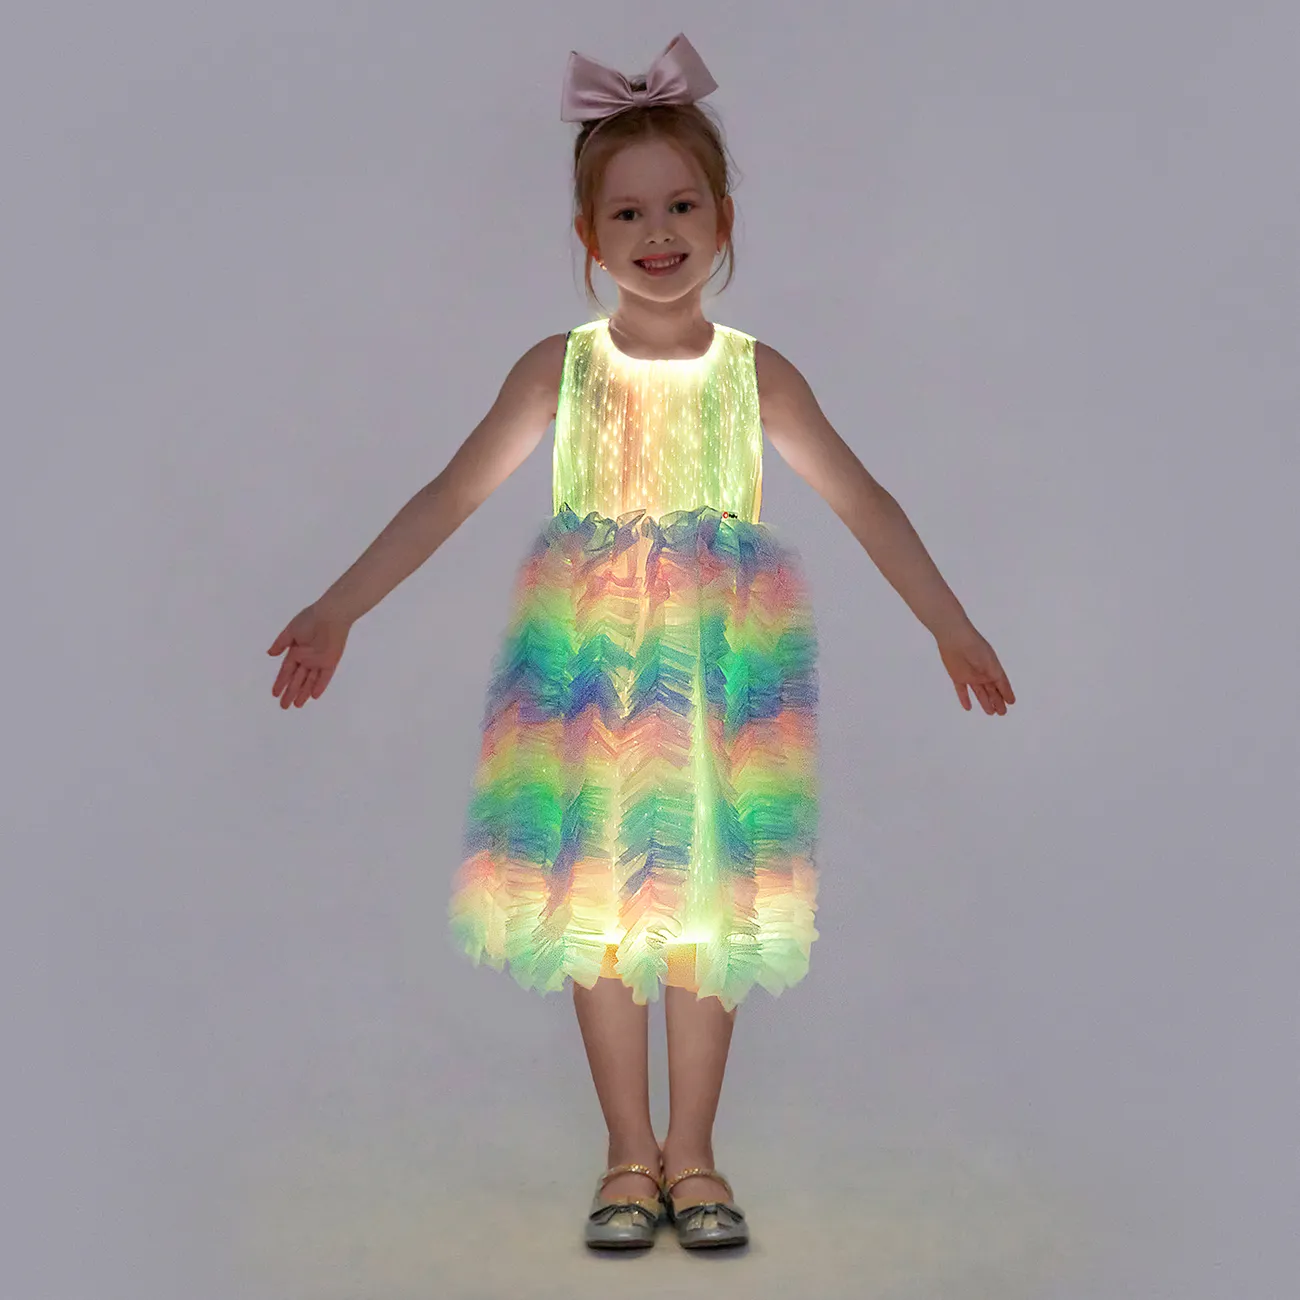 Go-Glow Light Up Colorful Princess Party Dress with Ruffled Skirt Including Controller (Built-In Battery) Multi-color big image 1